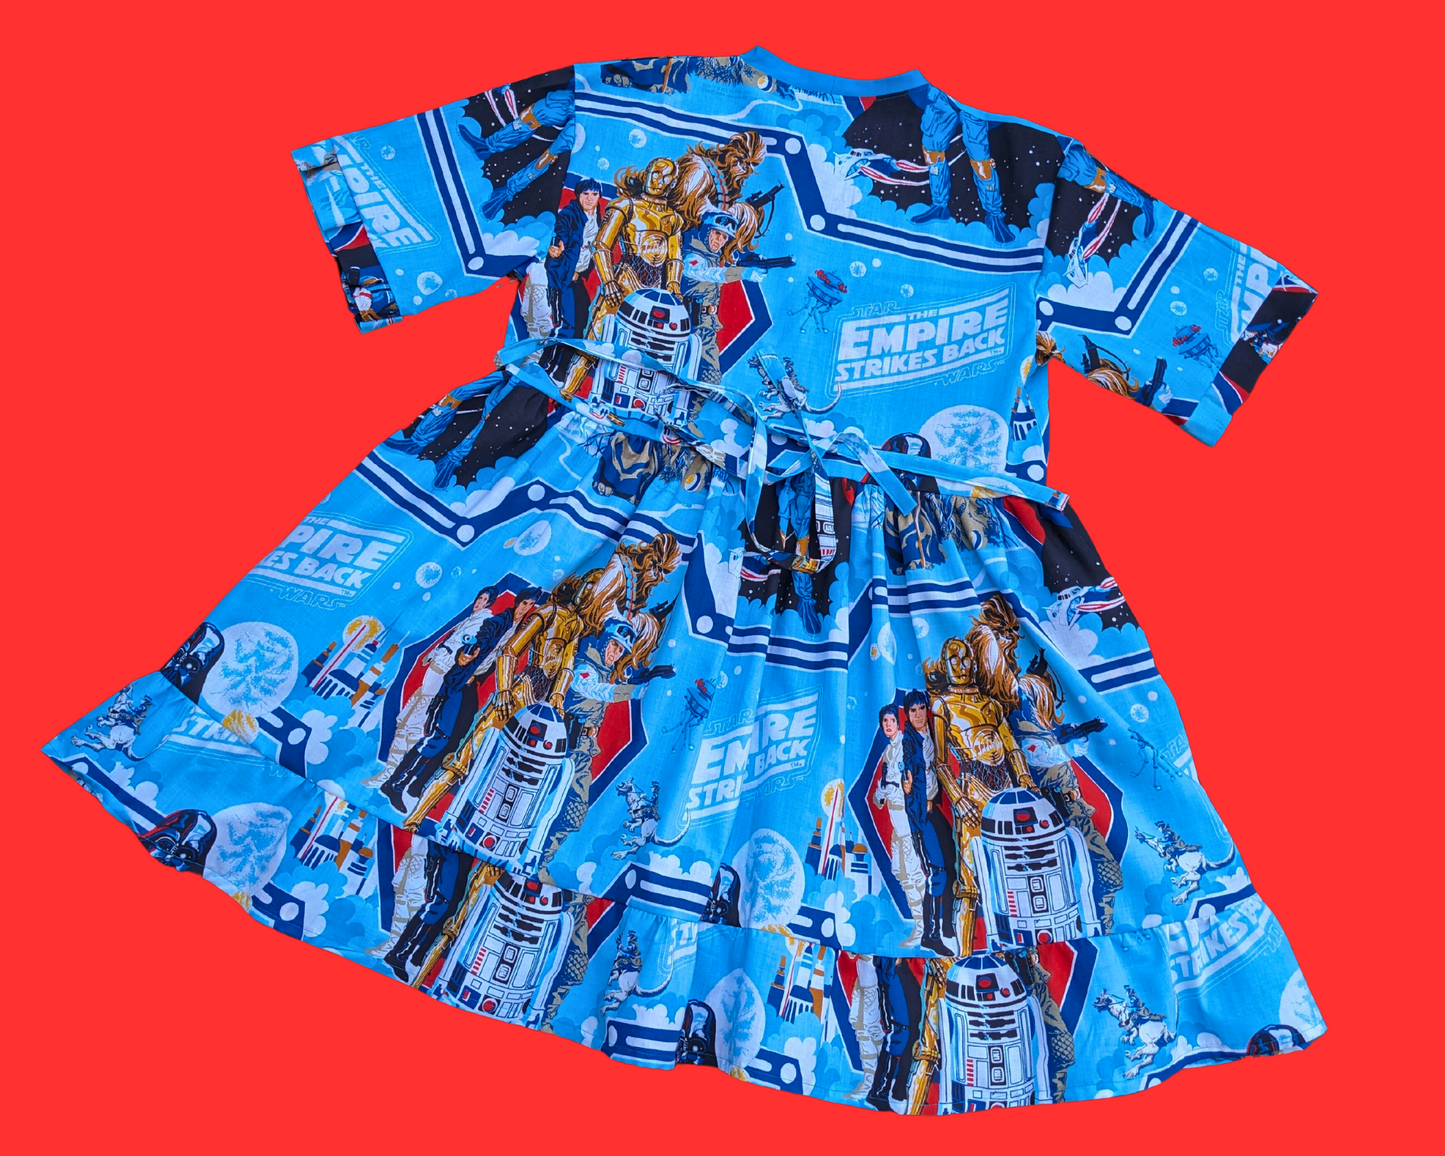 Handmade, Upcycled Vintage Star Wars The Empire Strikes Again Bedsheet T-Shirt Dress Fits S-M-L-XL with Matching Fanny Pack